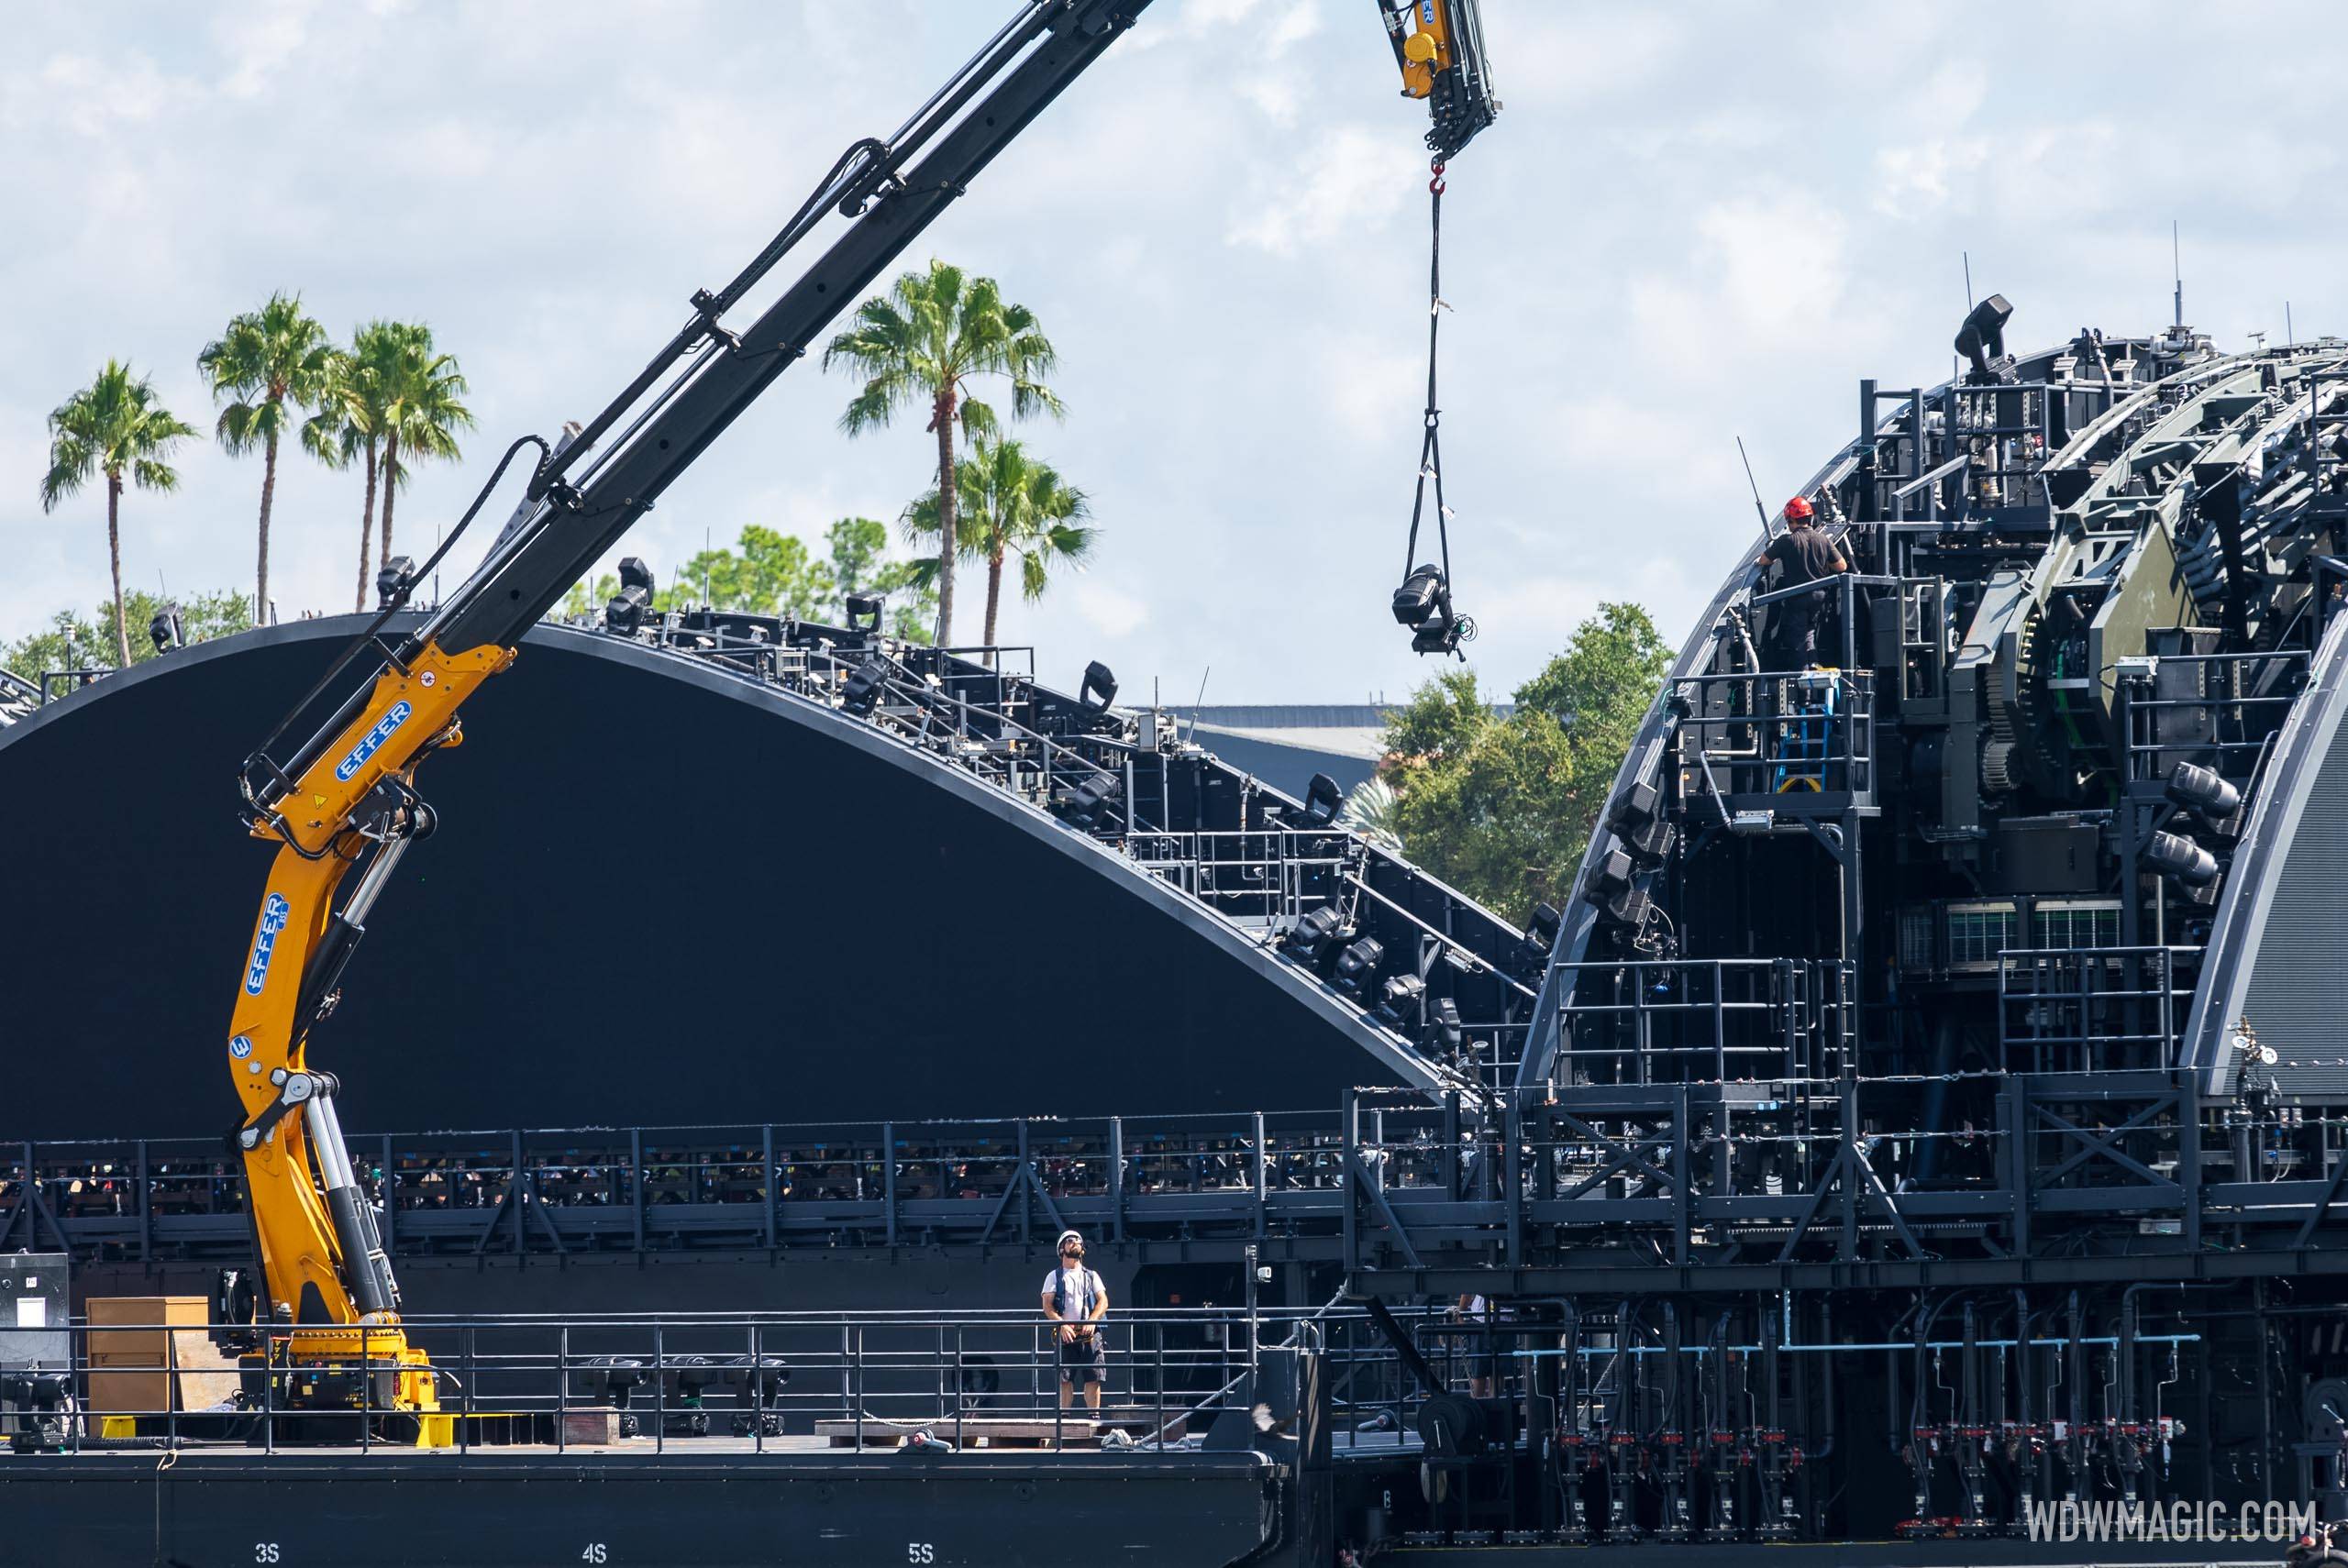 Hardware swap-out continues on the Harmonious show platform barges at EPCOT